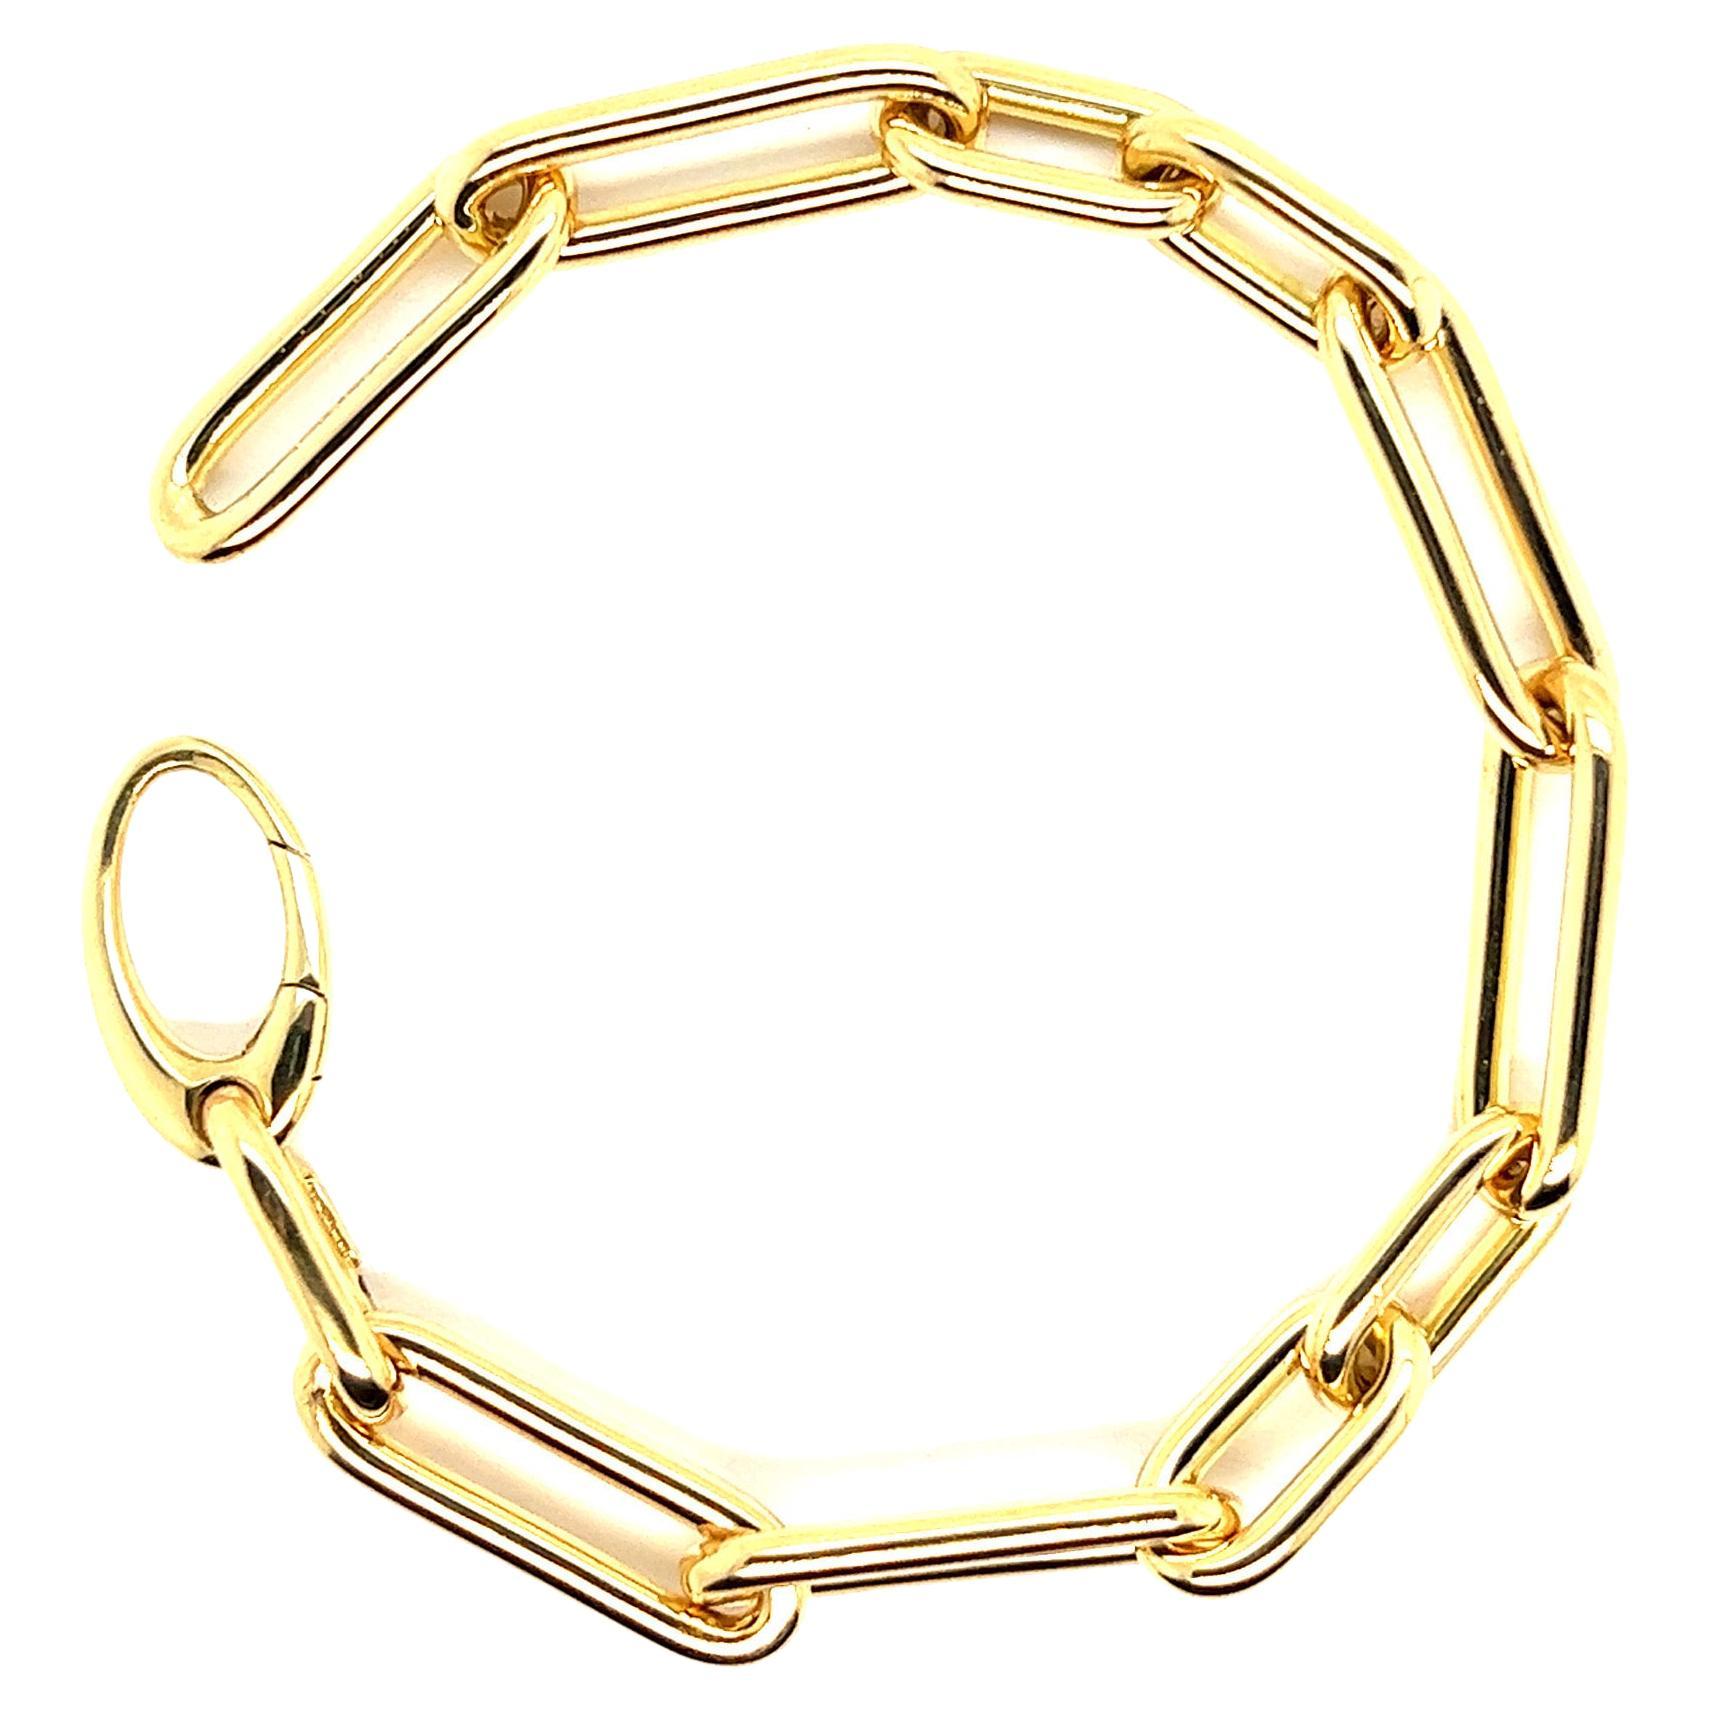 French Curb Bracelet with Fine Links 18 Carat Yellow Gold